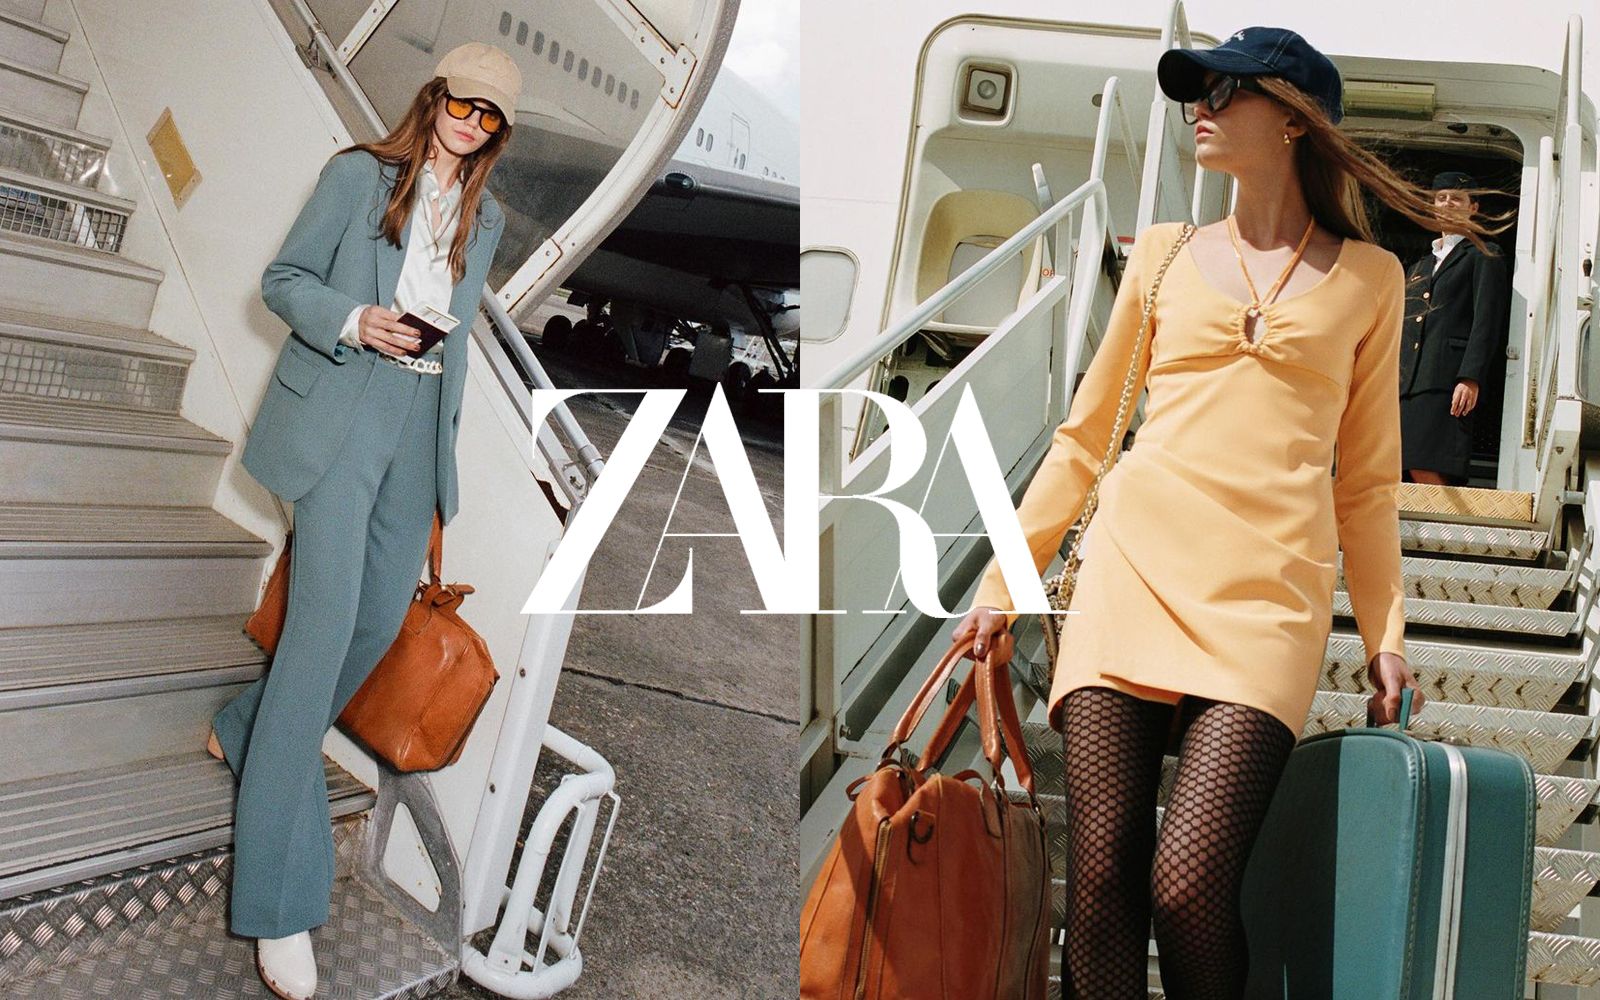 Zara and the fast-fashion that plays luxury